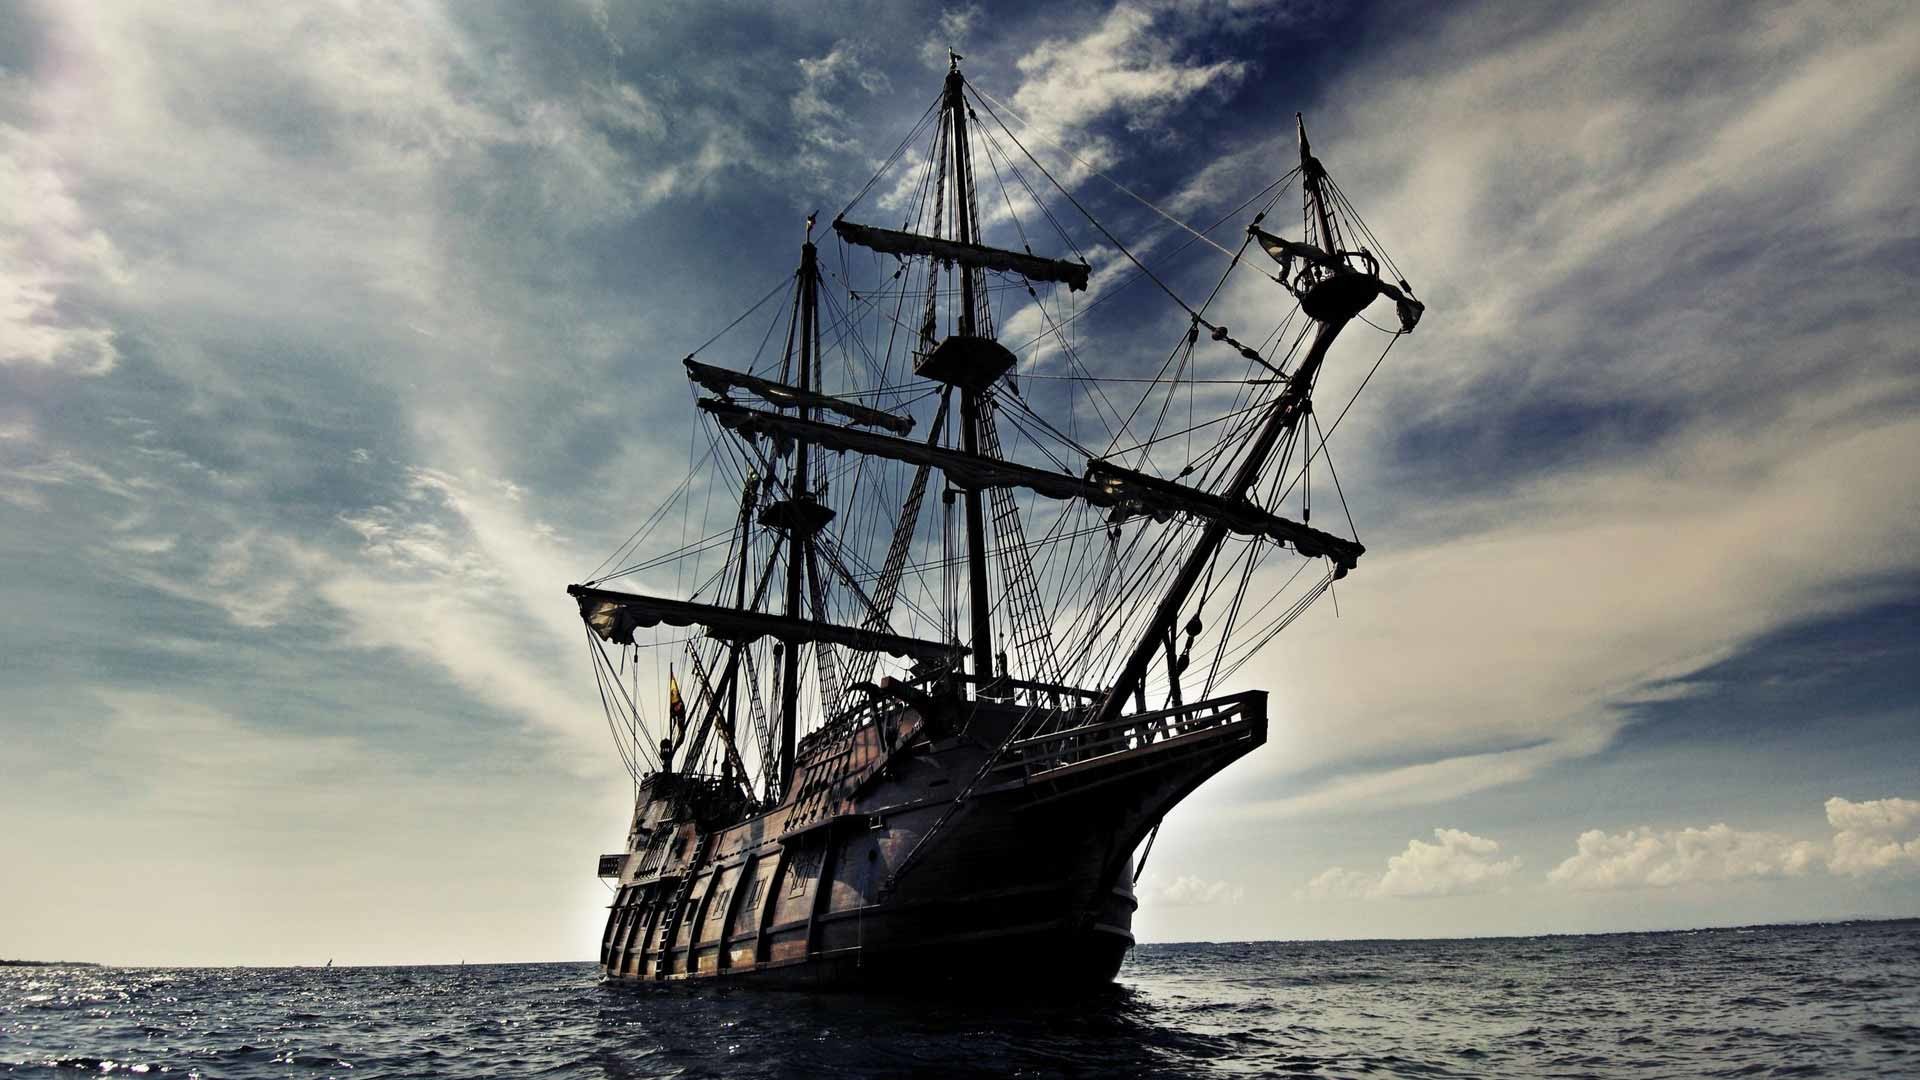 1920x1080 Pirates Of The Caribbean Black Pearl Wallpaper For Android #OSG 1920 x 1080  px 623.08